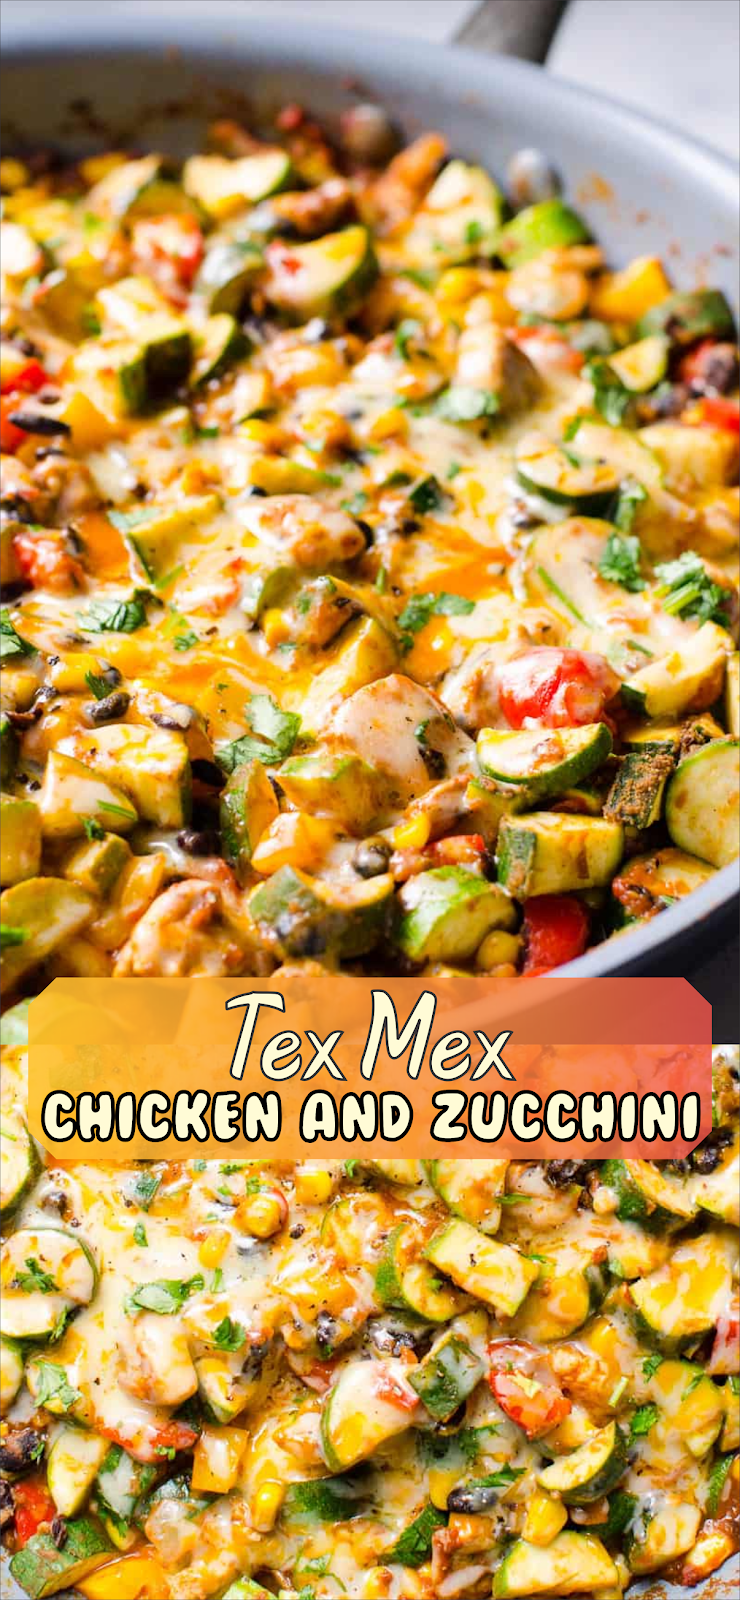 Tex Mex Chicken and Zucchini | Floats CO